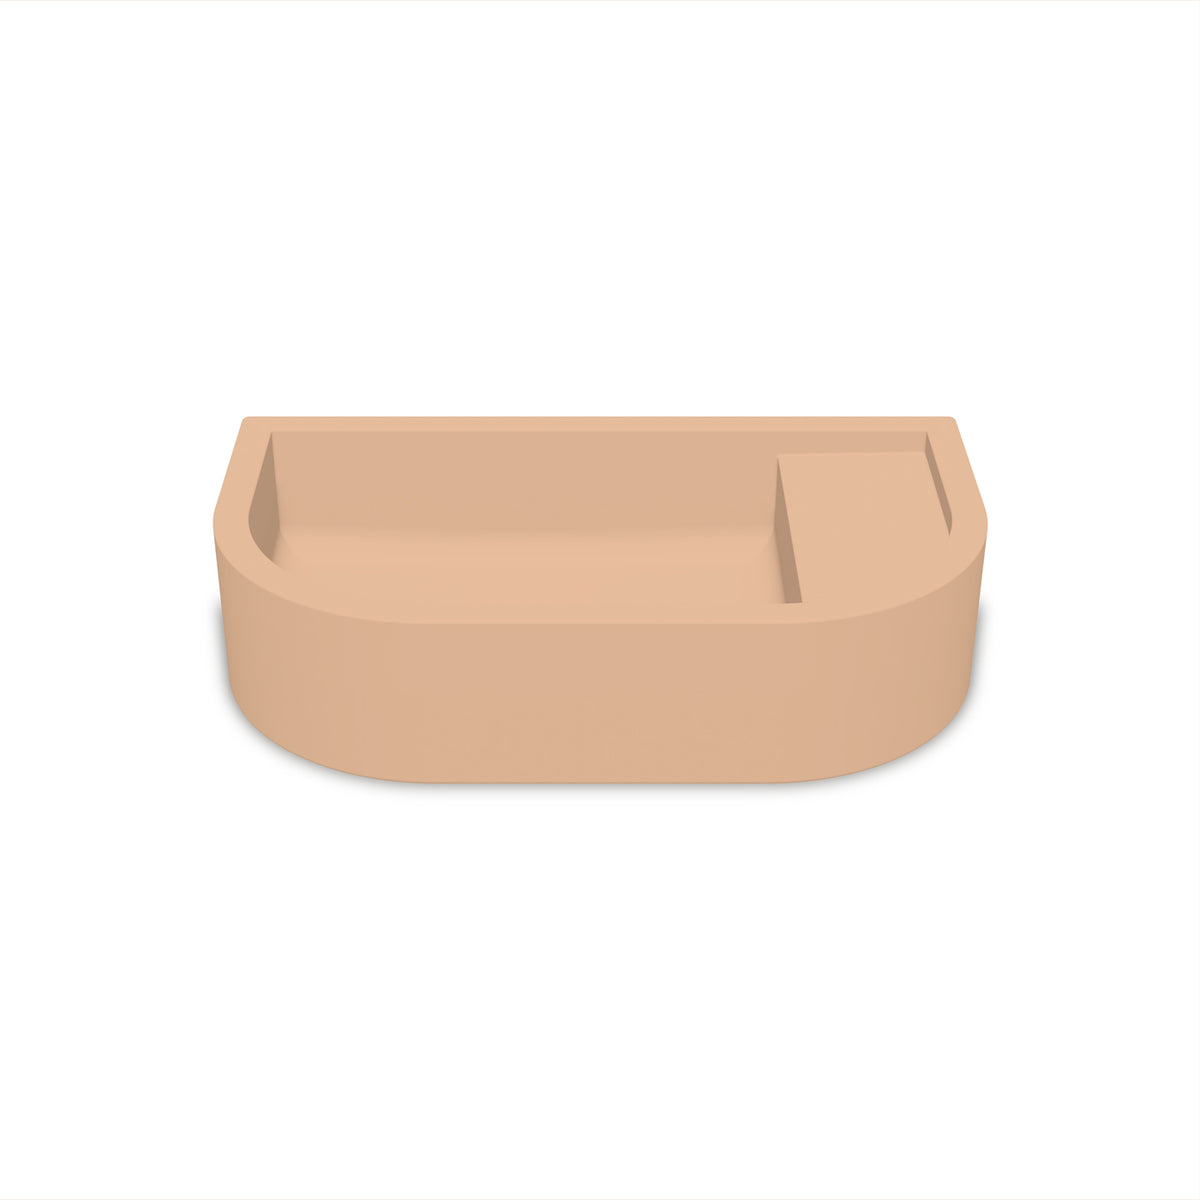 Loop 02 Basin - Overflow - Wall Hung (Pastel Peach,No Tap Hole,White)